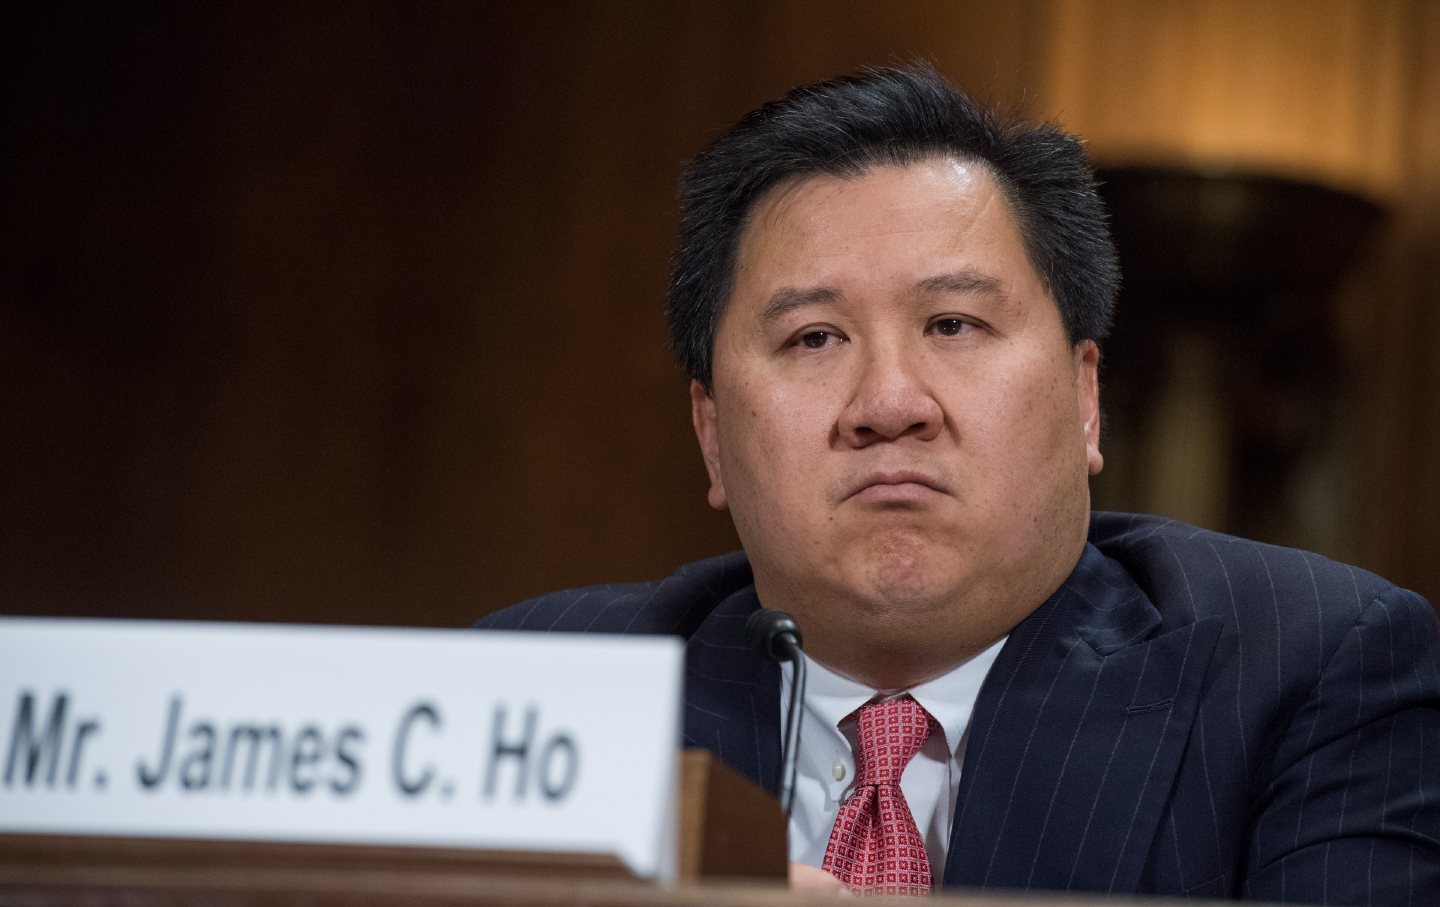 James C. Ho testifies before the Senate Judiciary Committee during his nomination hearing to be a judge for the Fifth Circuit Court of Appeals on November 15, 2017.